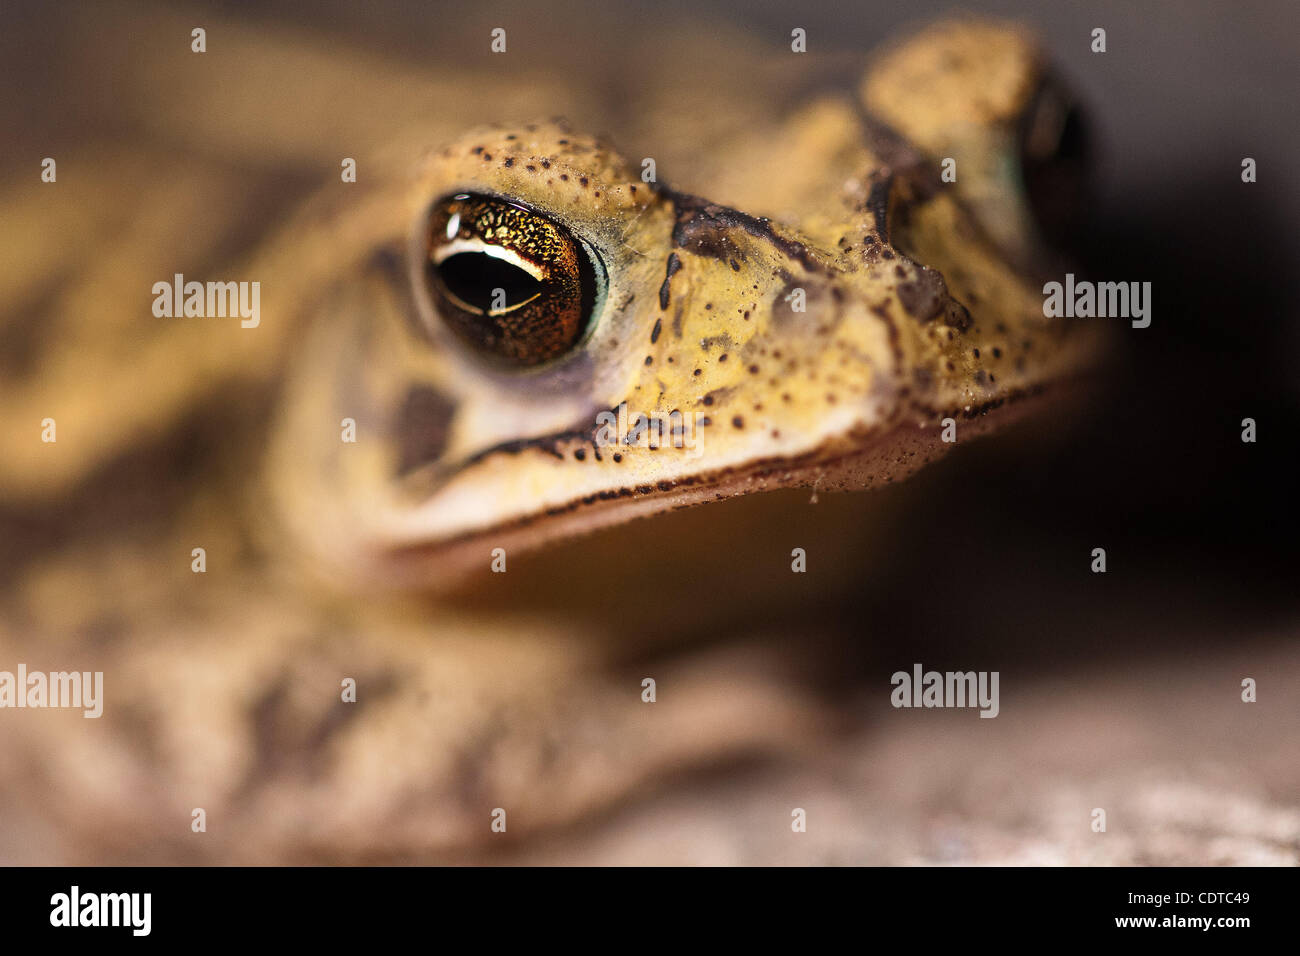 June 1, 2011 - Houston, Texas, U.S. - Woodhouse Toad sits by the edge of a garage door at night. (Credit Image: © Juan DeLeon/Southcreek Global/ZUMAPRESS.com) Stock Photo